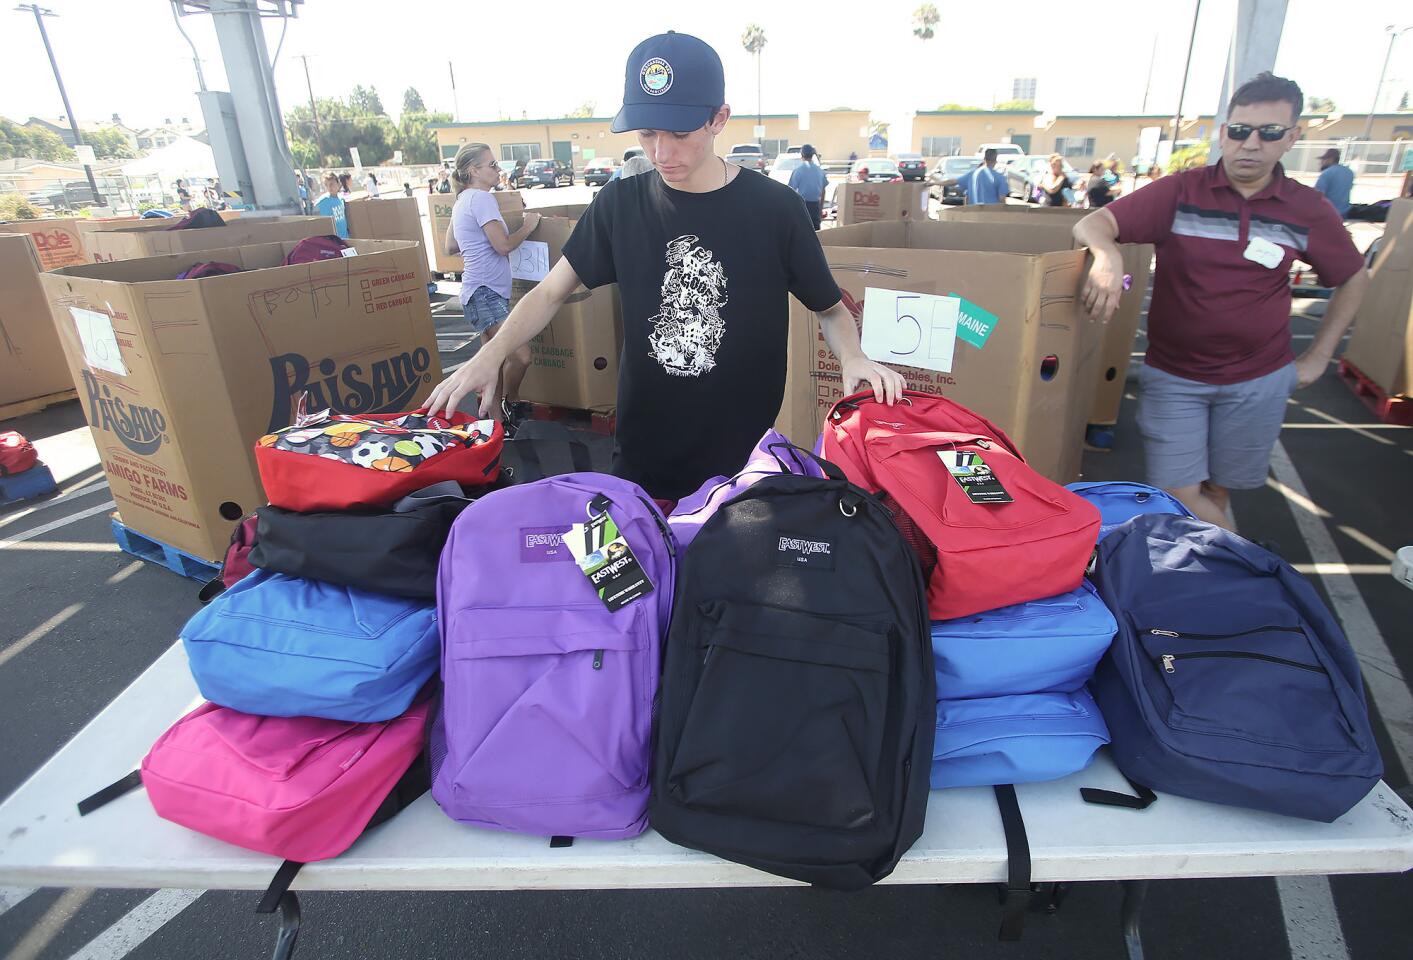 Reece Jones, a Huntington Beach High student, organizes colorful backpacks during the Share Our Selves (SOS) 23rd Annual Back to School Distribution on Saturday, at the BESST Center in Costa Mesa. The SOS Back to School Program provides approximately 4,000 backpacks filled with school supplies to Orange County children in need.